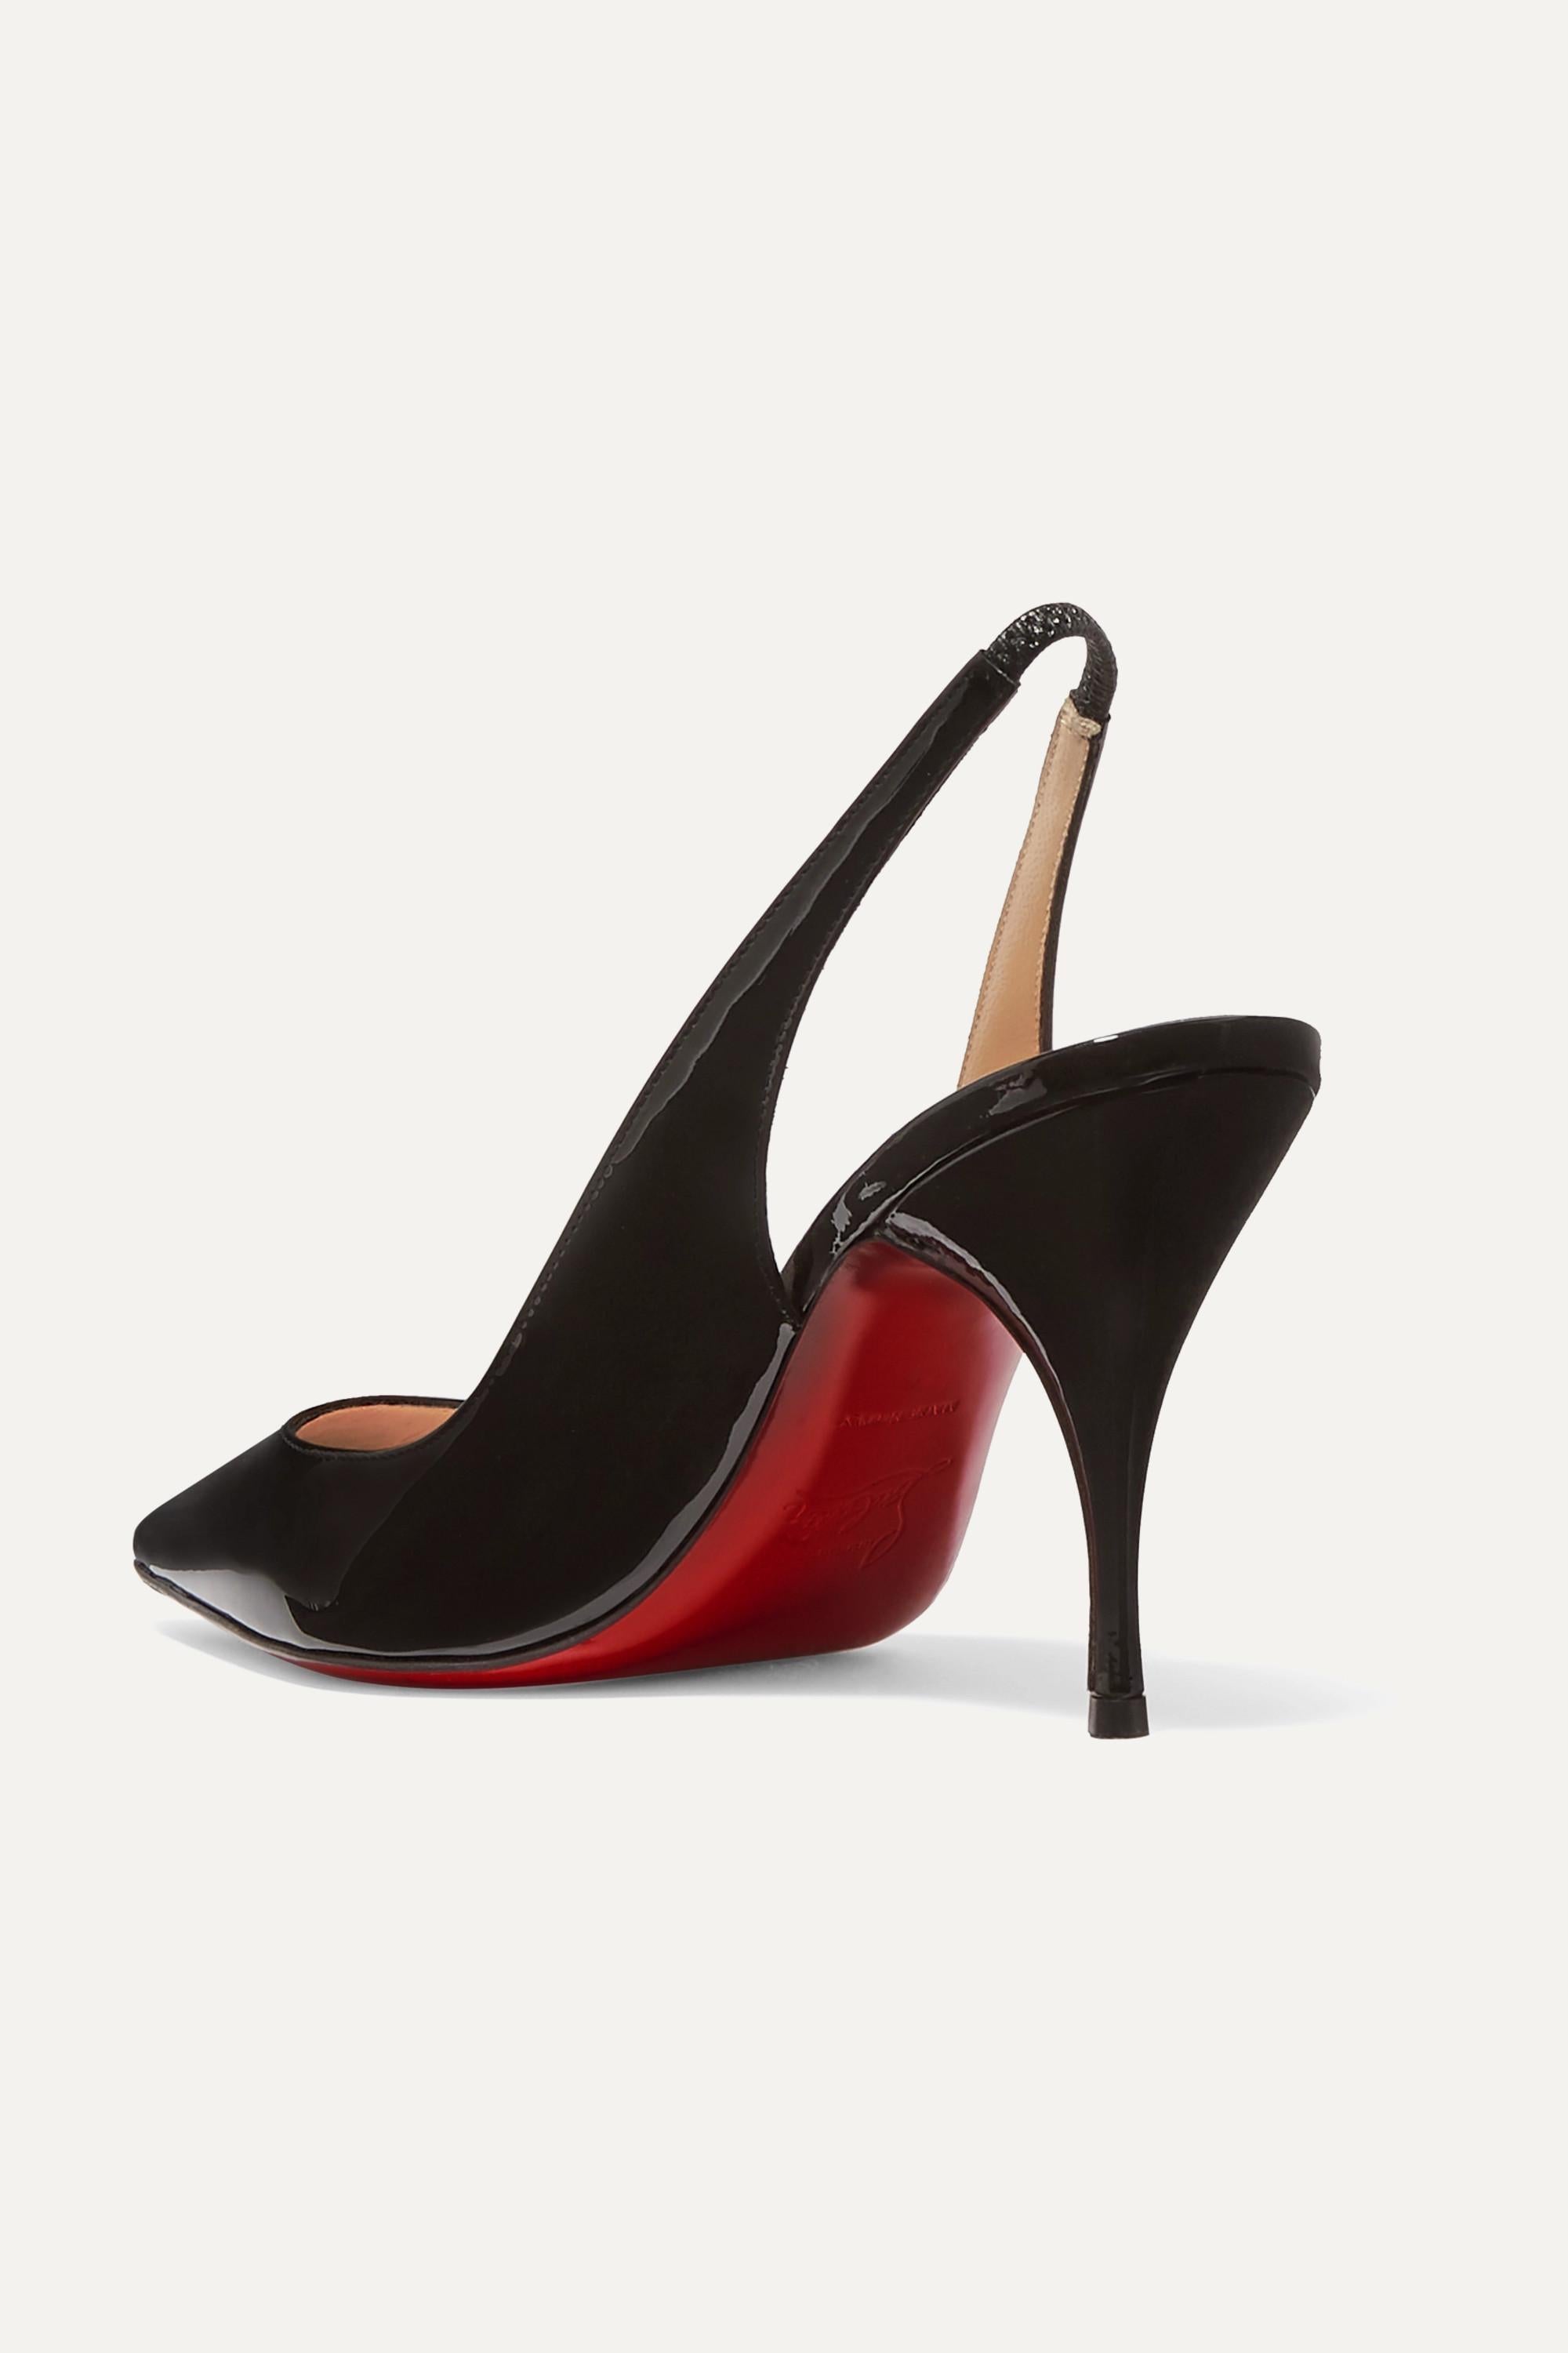 Christian Louboutin Clare Sling 80 Black Patent Leather Pumps Sz 36.5 In New Condition For Sale In Paradise Island, BS